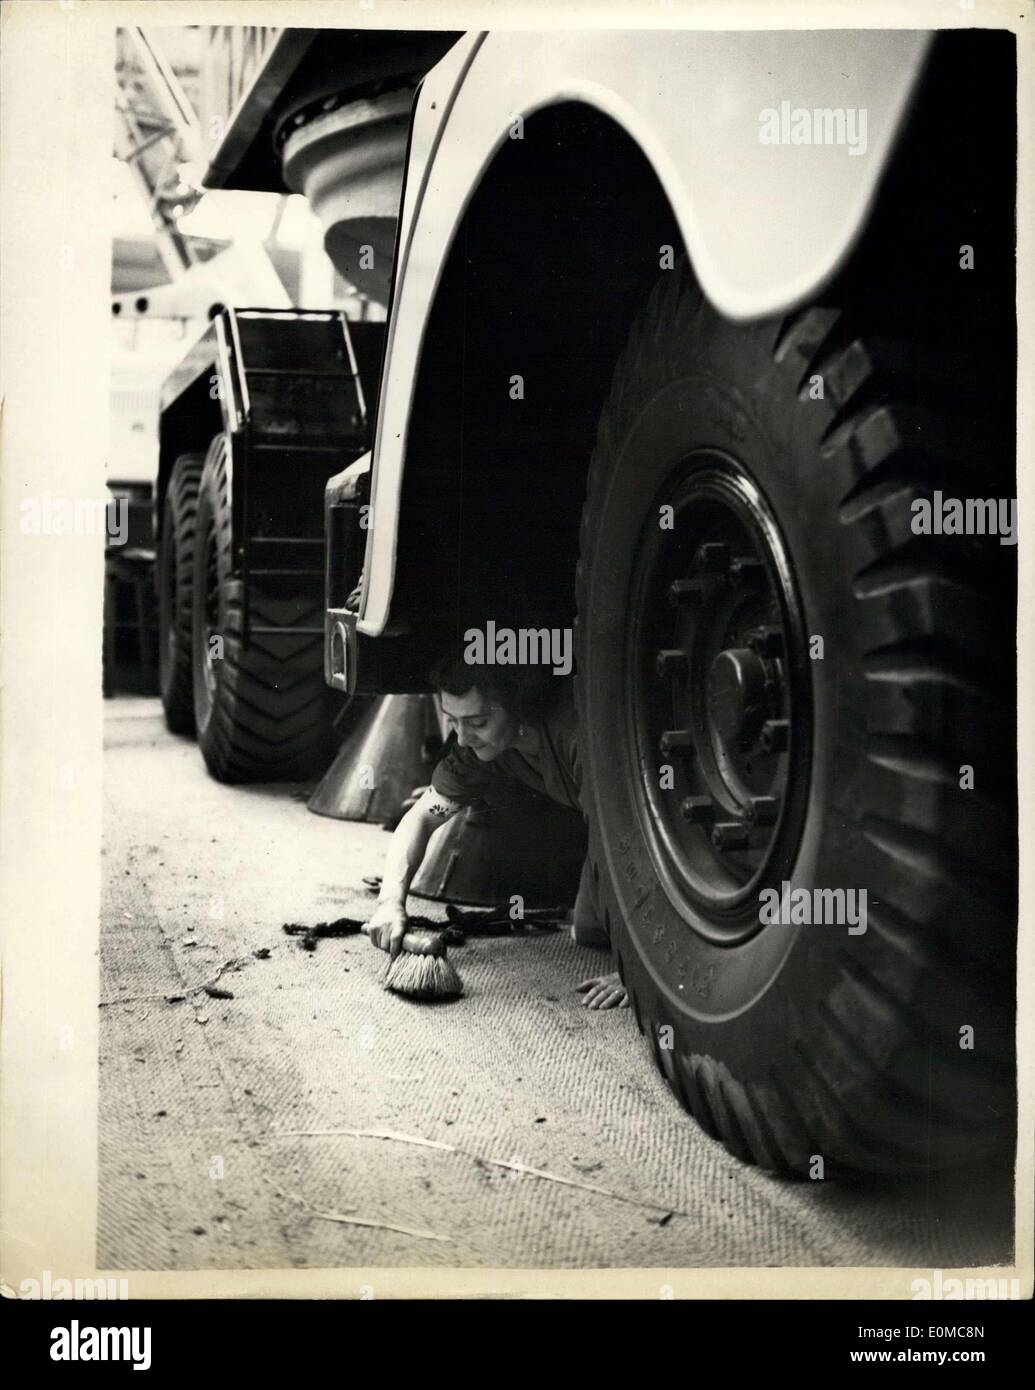 Jun. 08, 1954 - Fourth Mechanical Handling Exhibition And Convention At Olympia. Photo shows This cleaner at Olympia is dwarfed Stock Photo